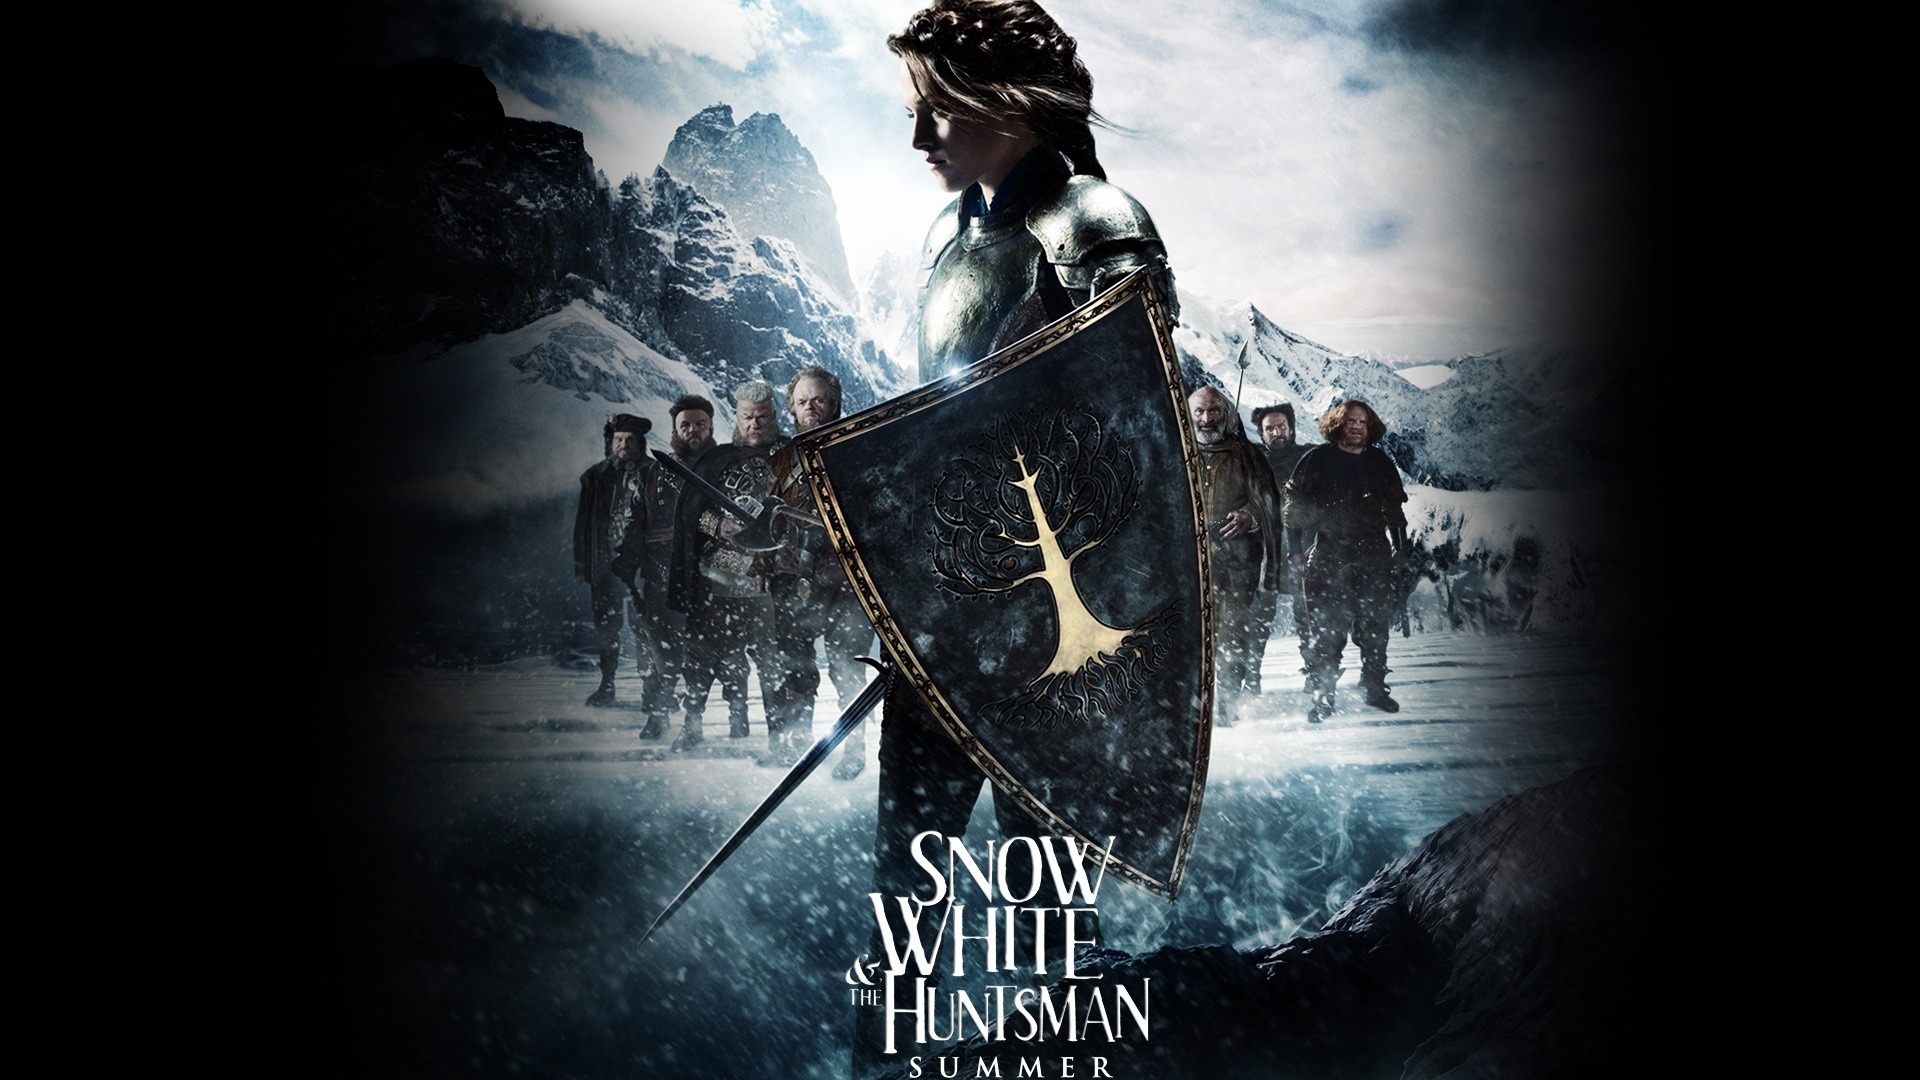 Snow White and the Huntsman Movie Poster for 1920 x 1080 HDTV 1080p resolution